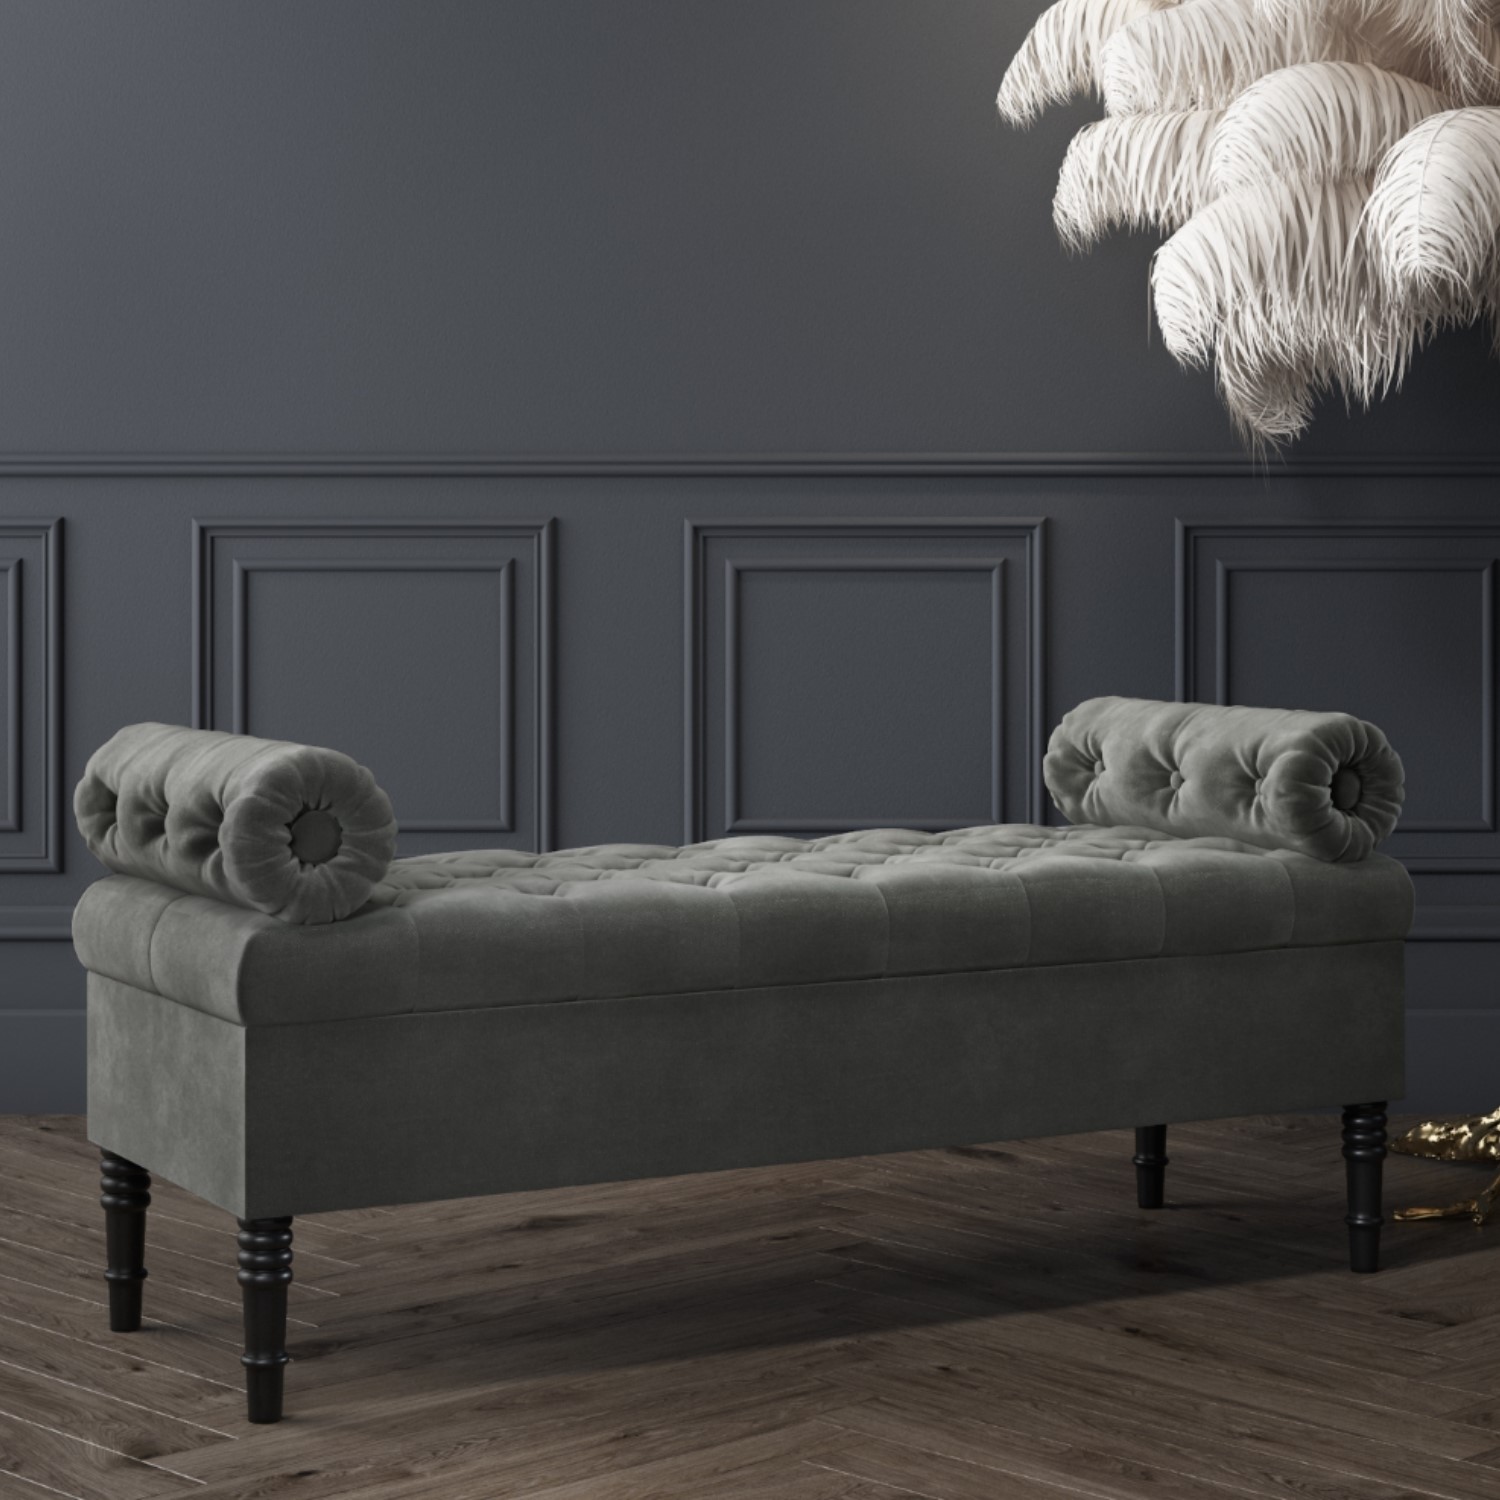 Safina Ottoman Storage Bench In Grey, Storage Bench For Foot Of King Bed